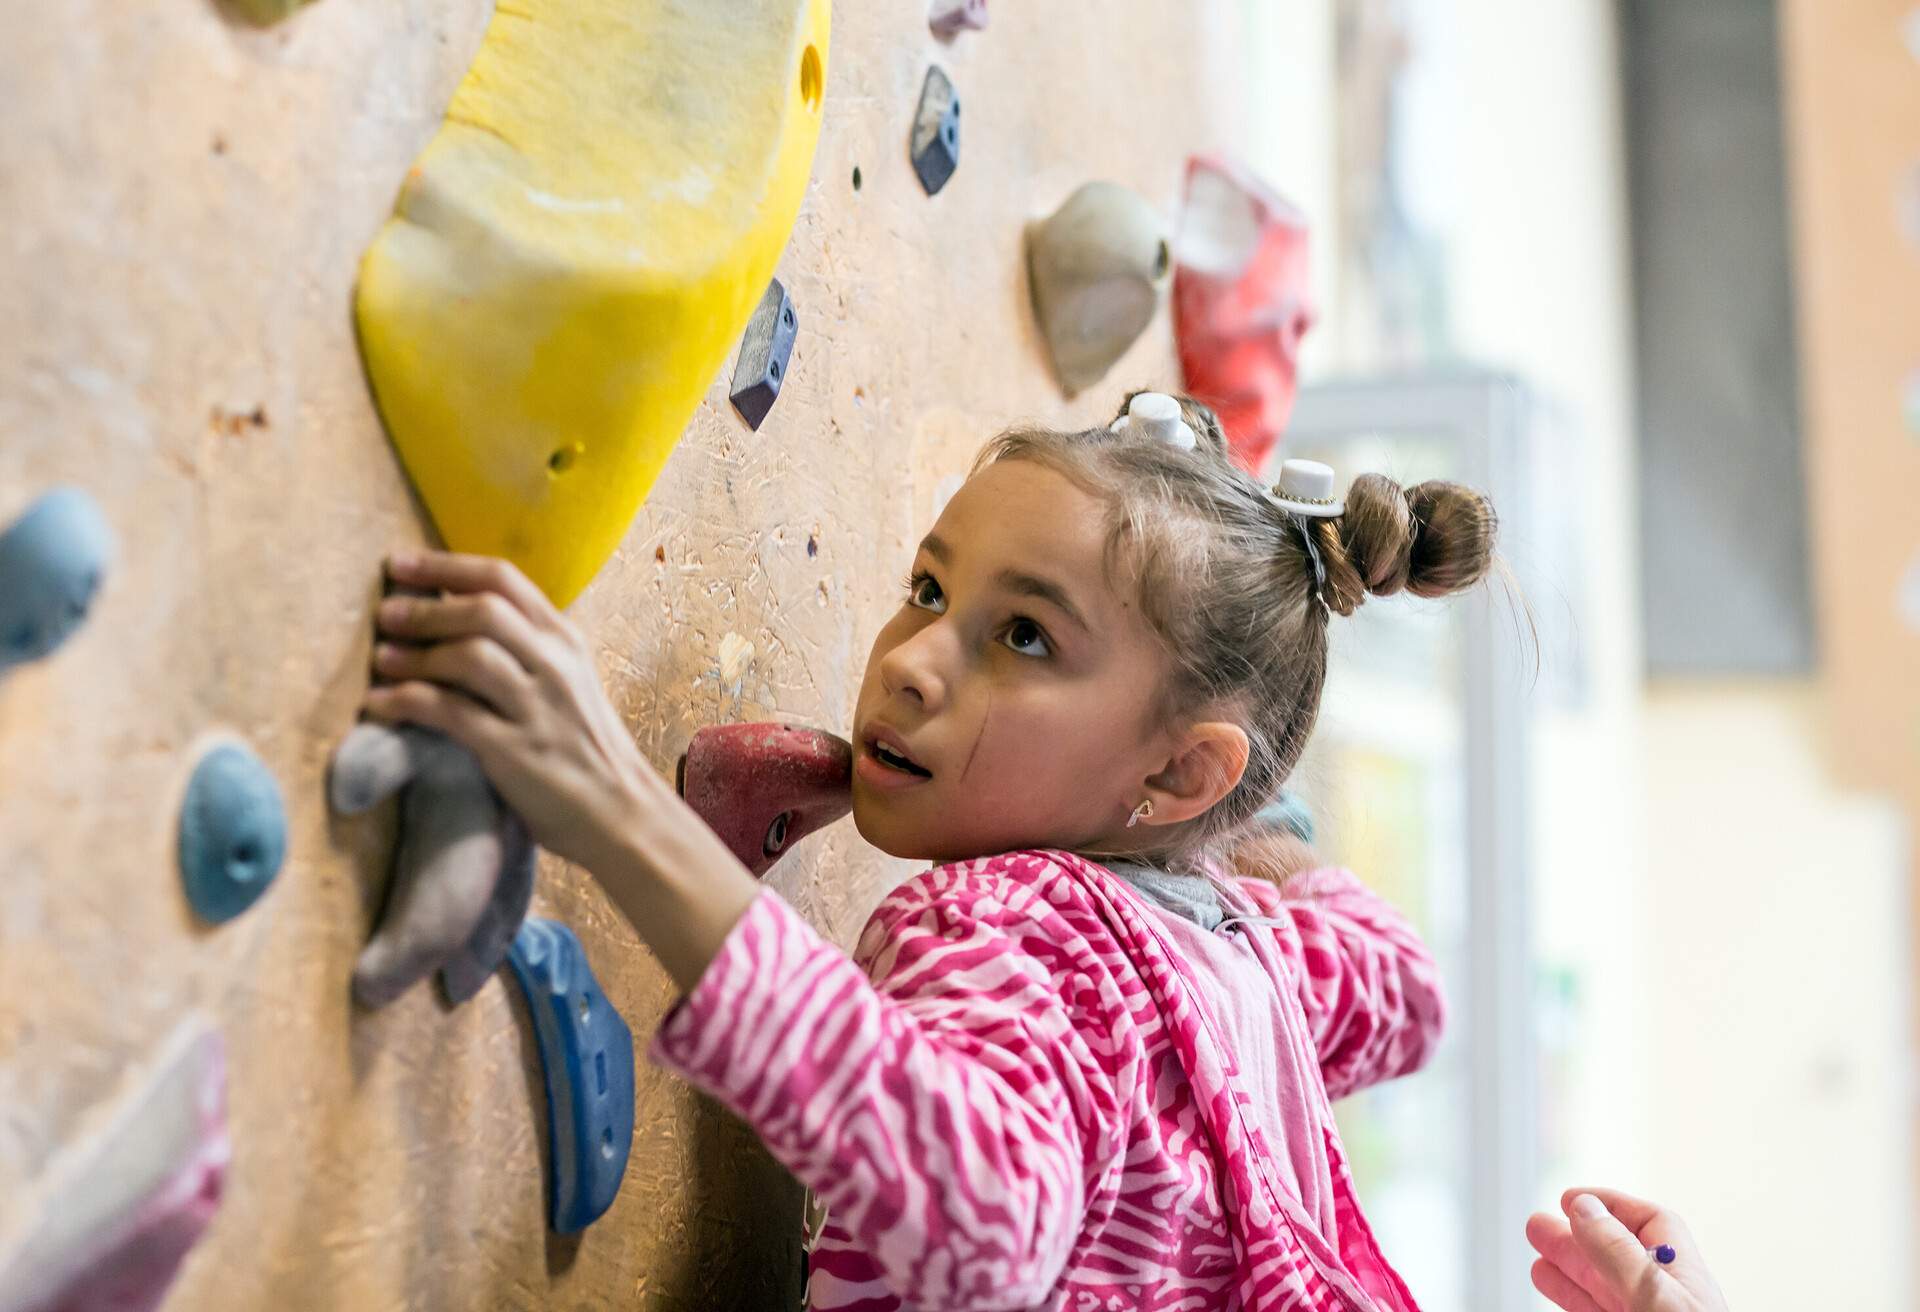 A young girl with a pink and white striped jacket climbing a wall.